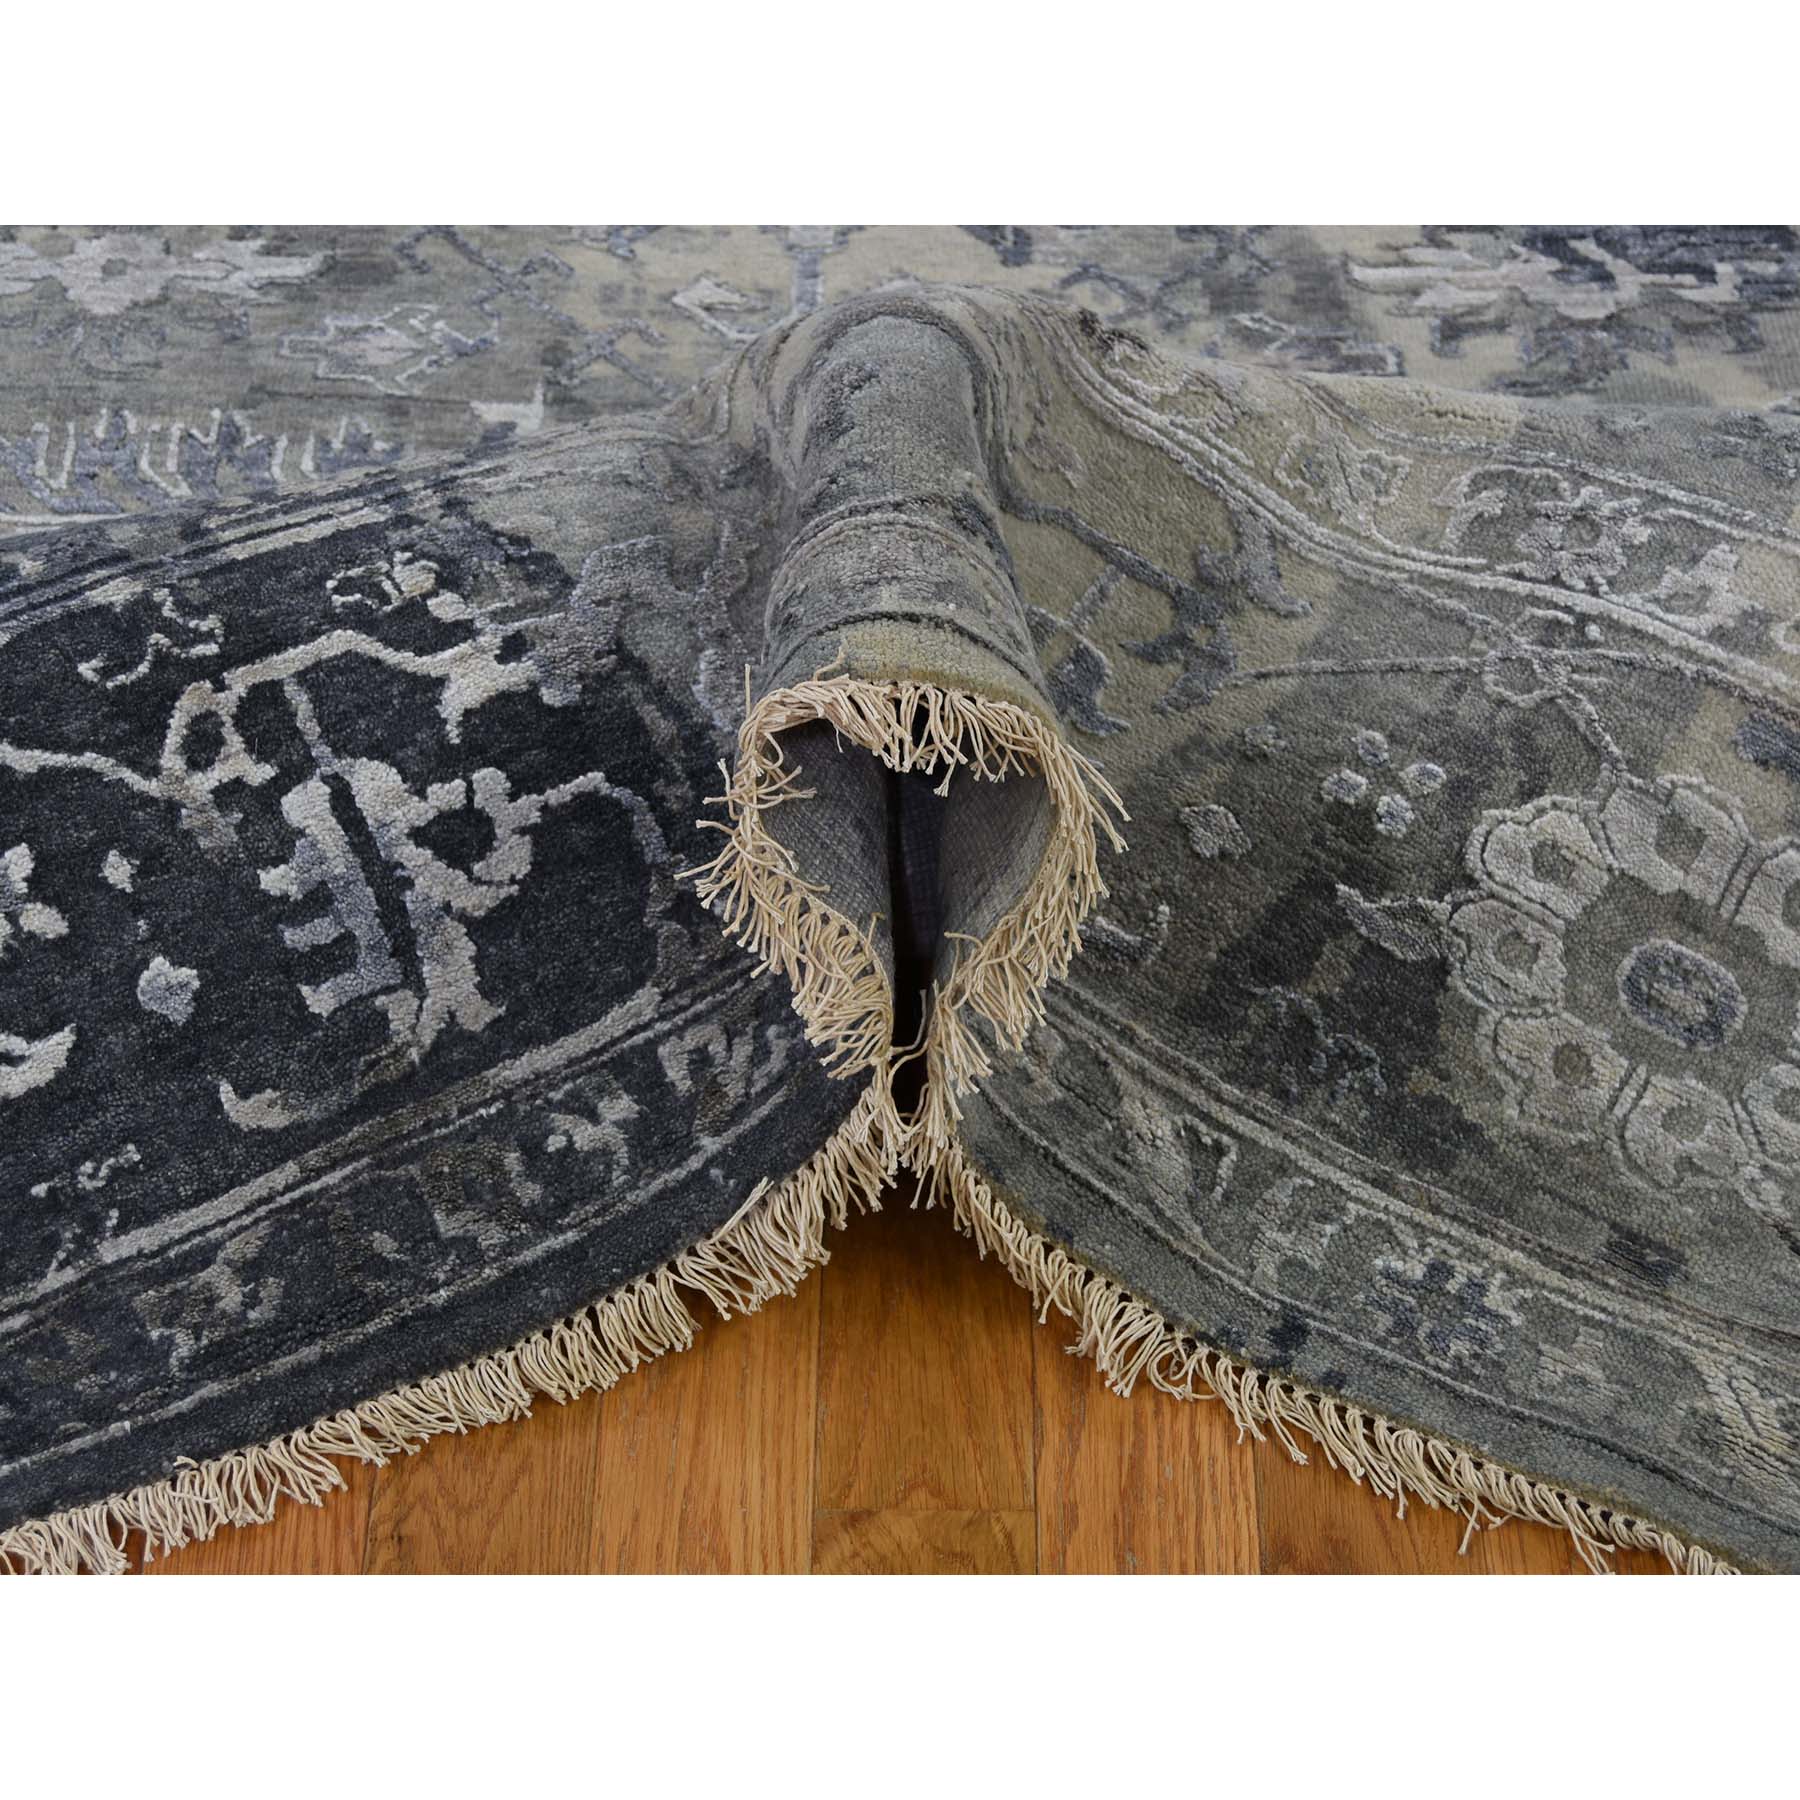 9-x11-10  All Over Design Broken Persian Heriz Wool And Silk Hand-Knotted Oriental Rug 